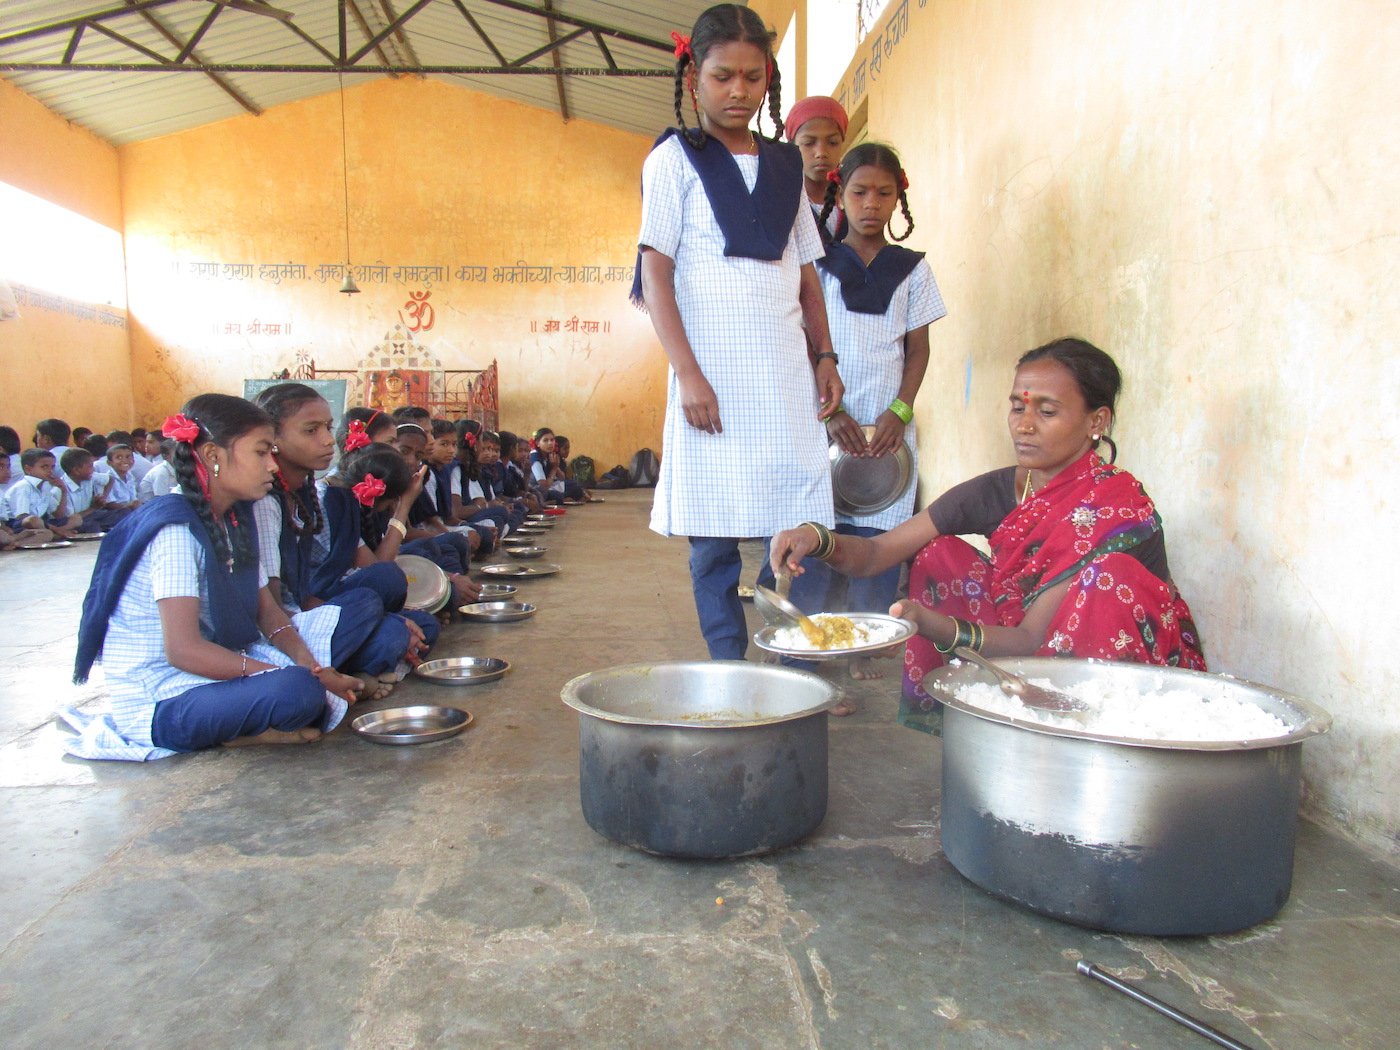 Students wait for their turn while the meal is being served